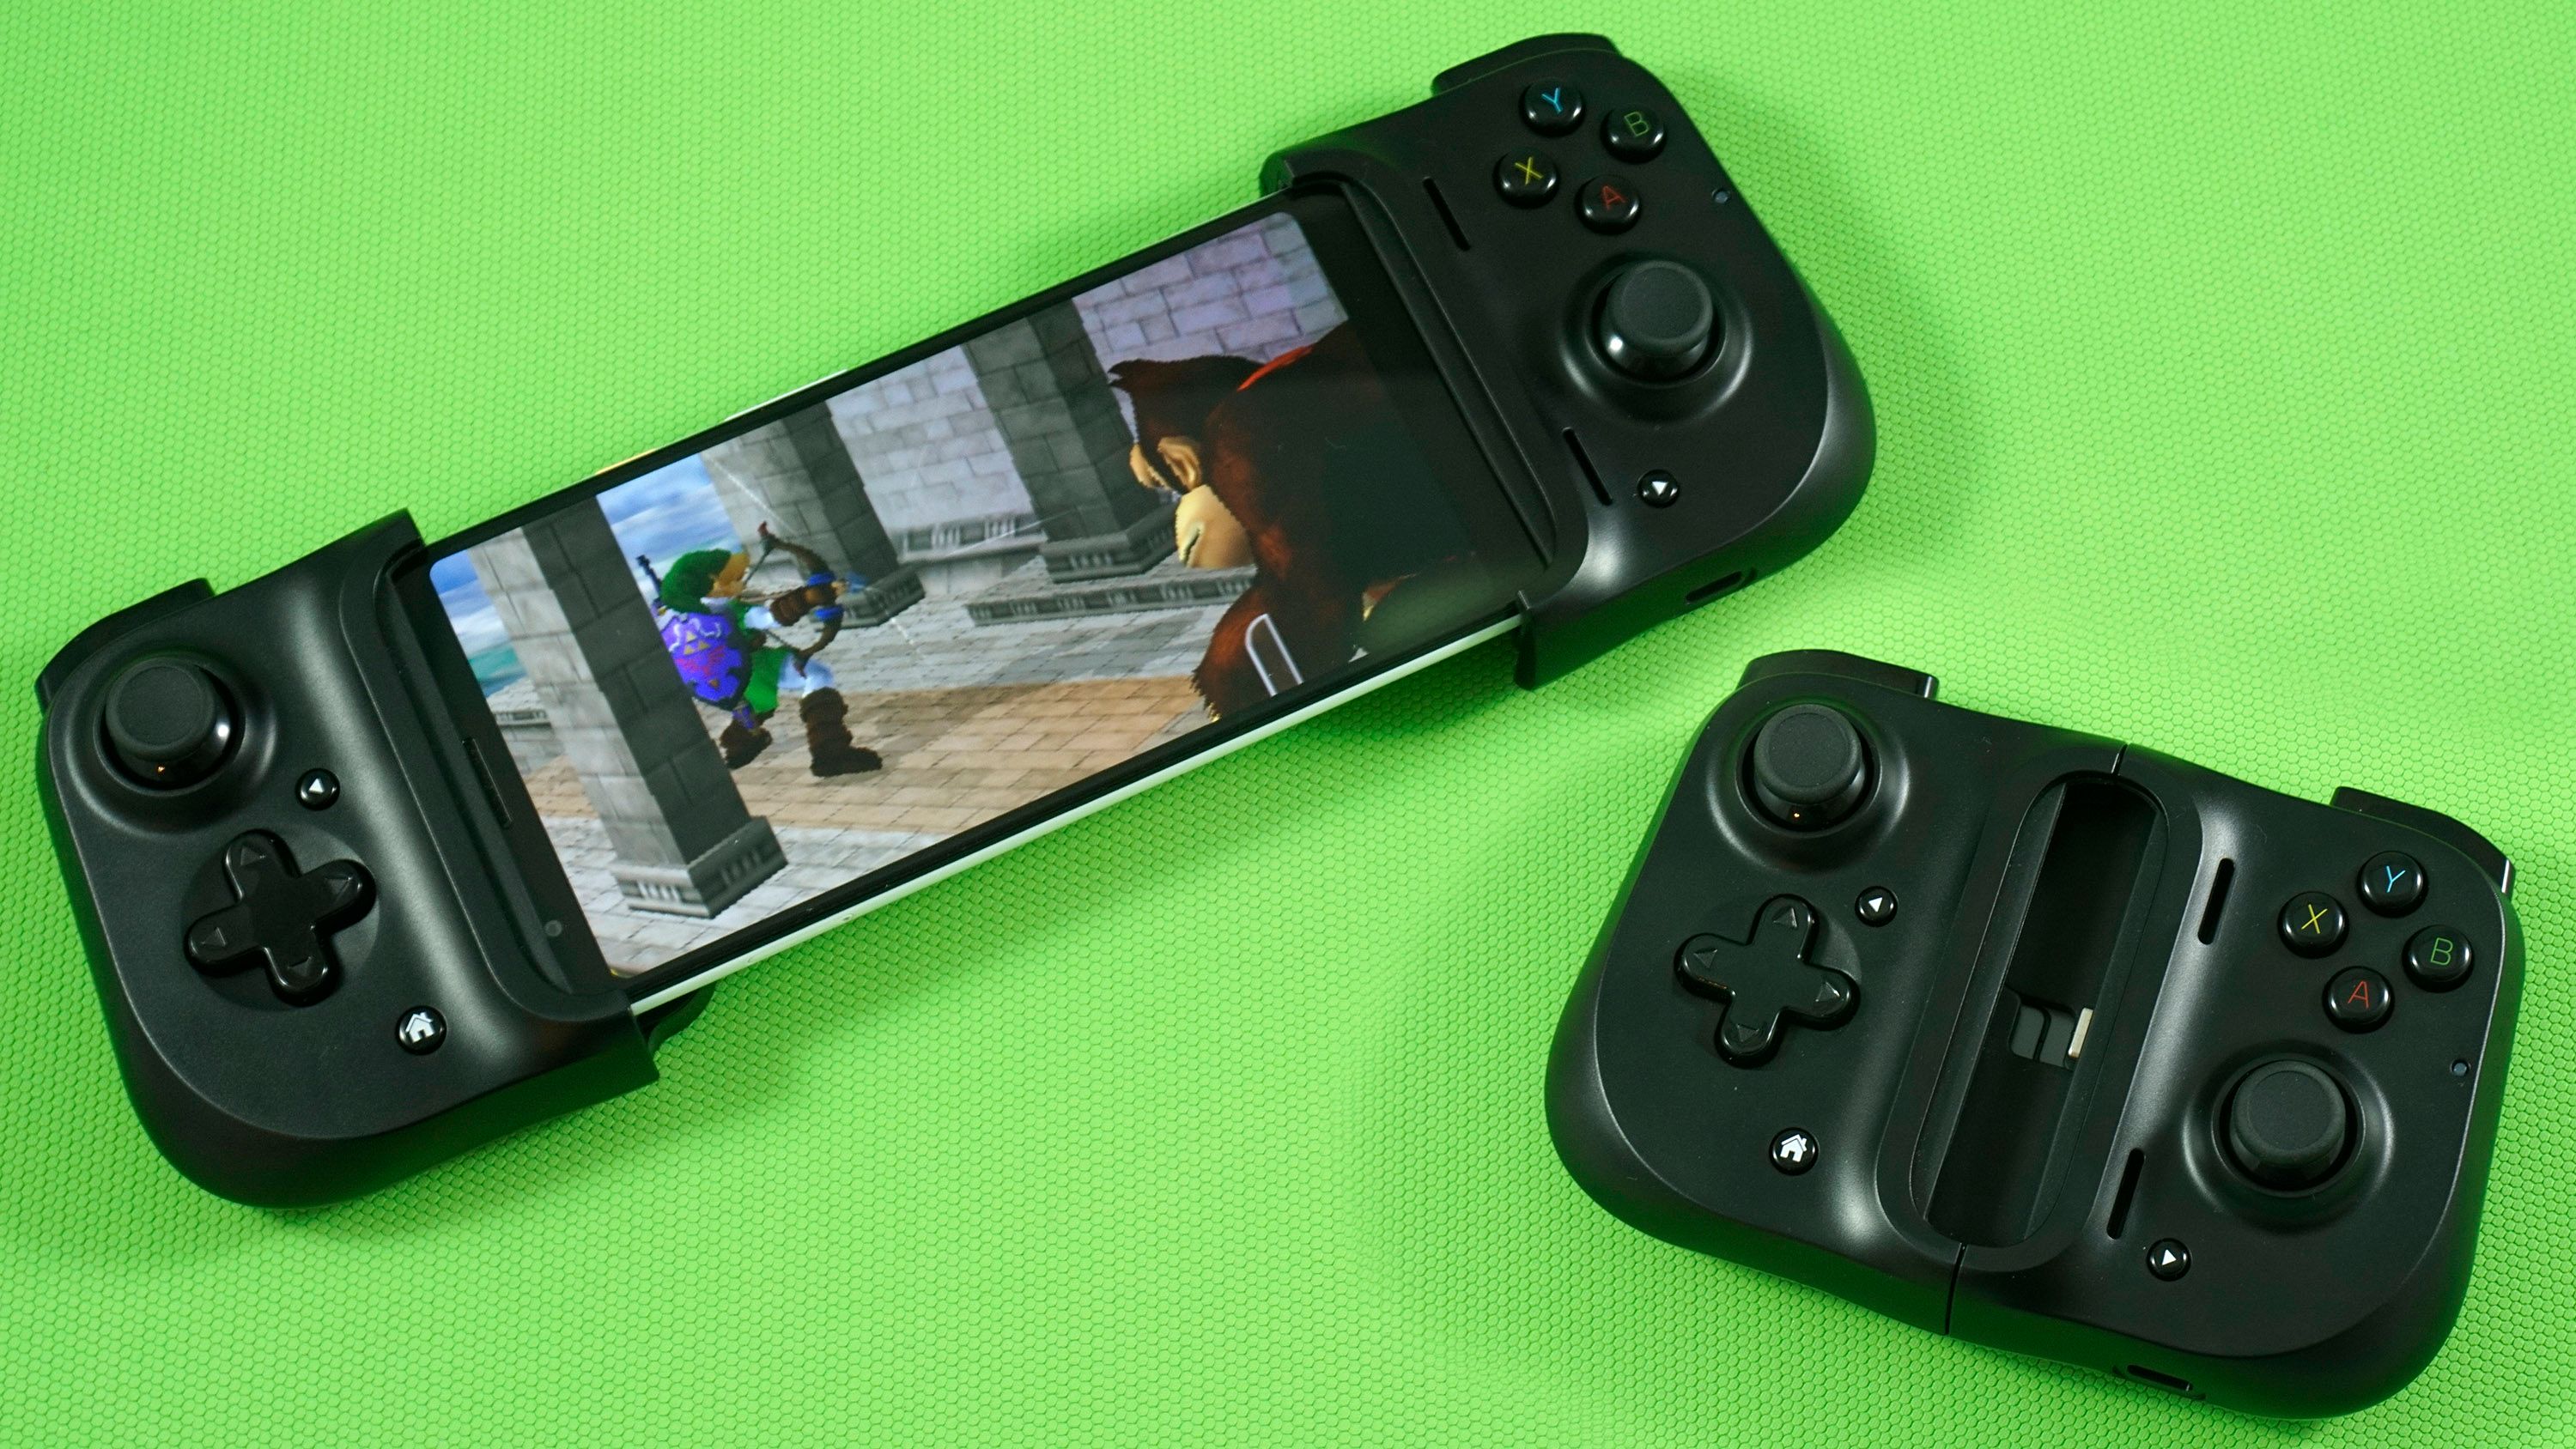 Geek Review: Razer Kishi V2 for Android